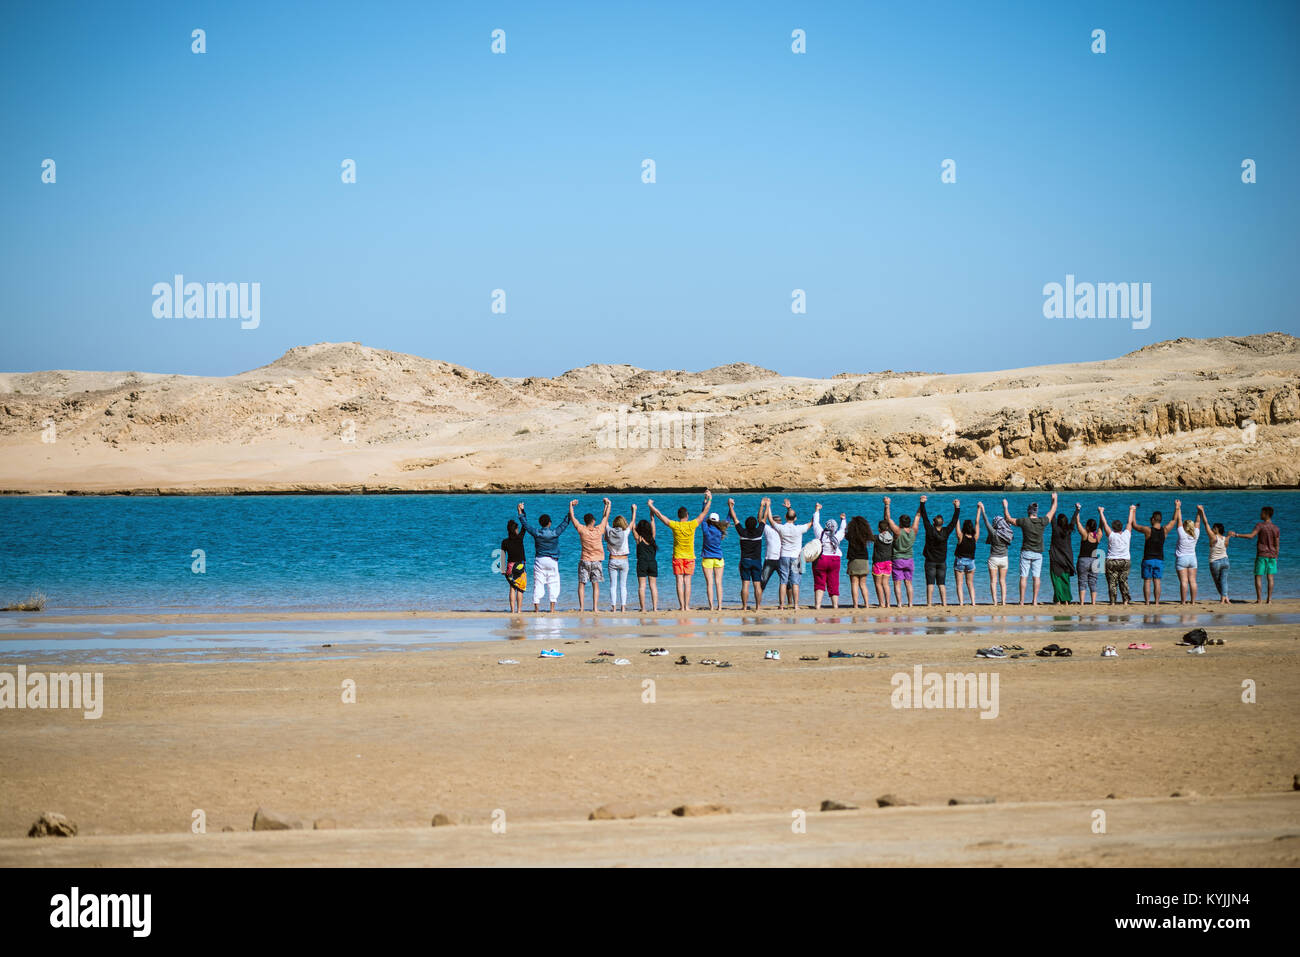 A group of people holding hands each other and standing near a blue lake surrounded by a desert Stock Photo